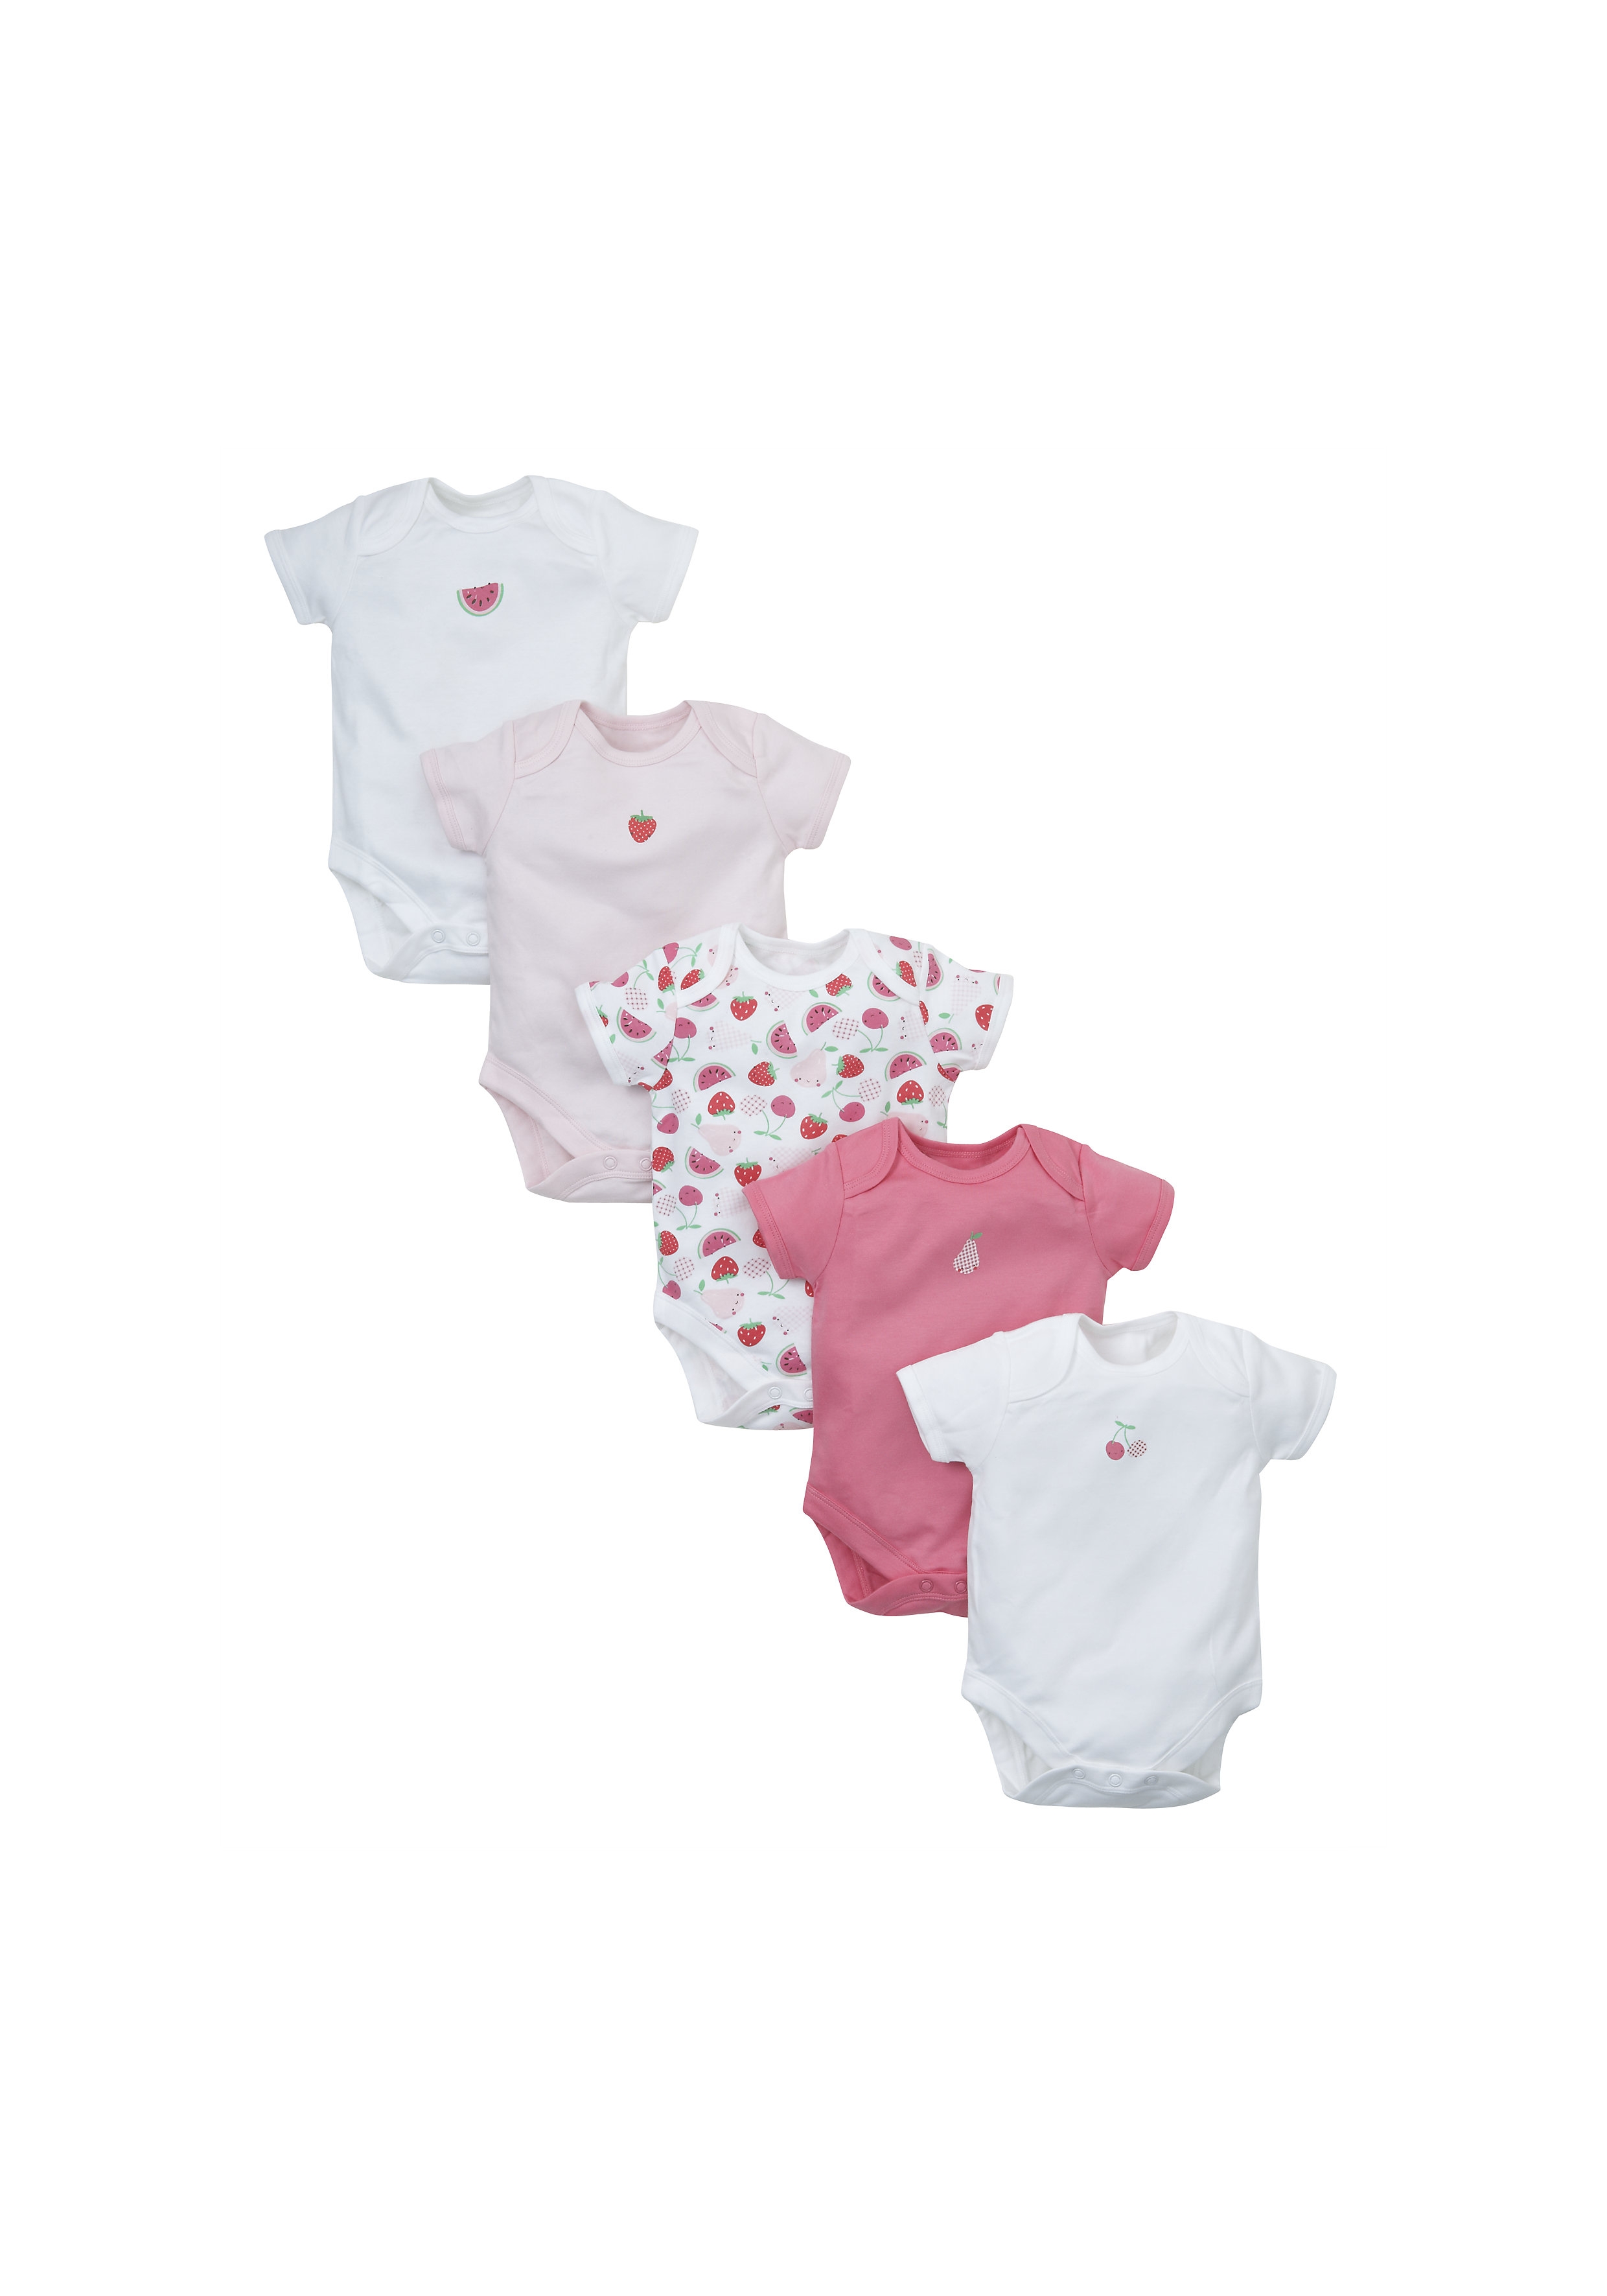 Mothercare | Girls Fruit Half Sleeve Bodysuits - Pack Of 5 - Multicolor 0